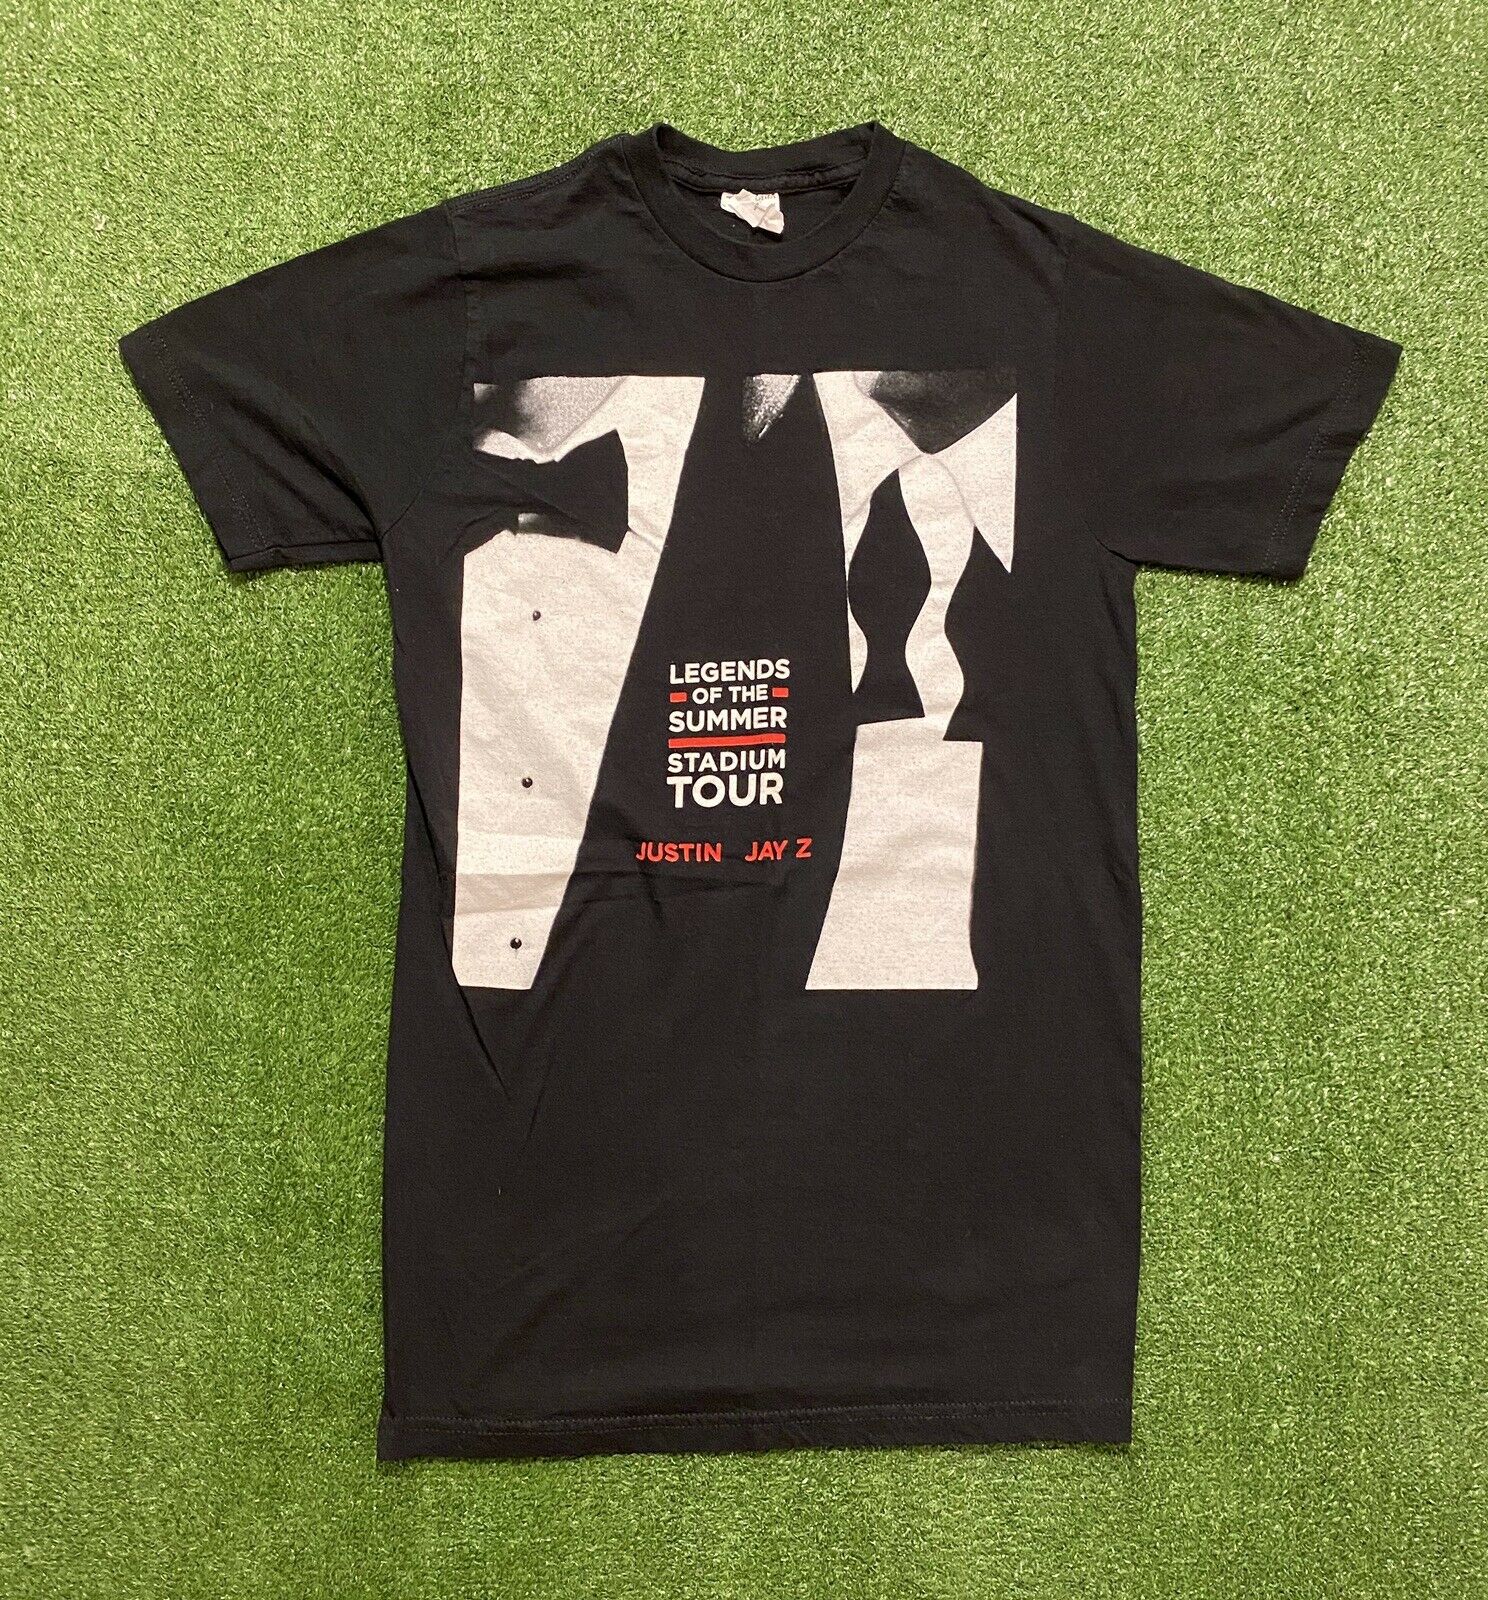 Jay-z & Justin Timberlake Legends Of The Summer Tour 2013 T Shirt. Size Small